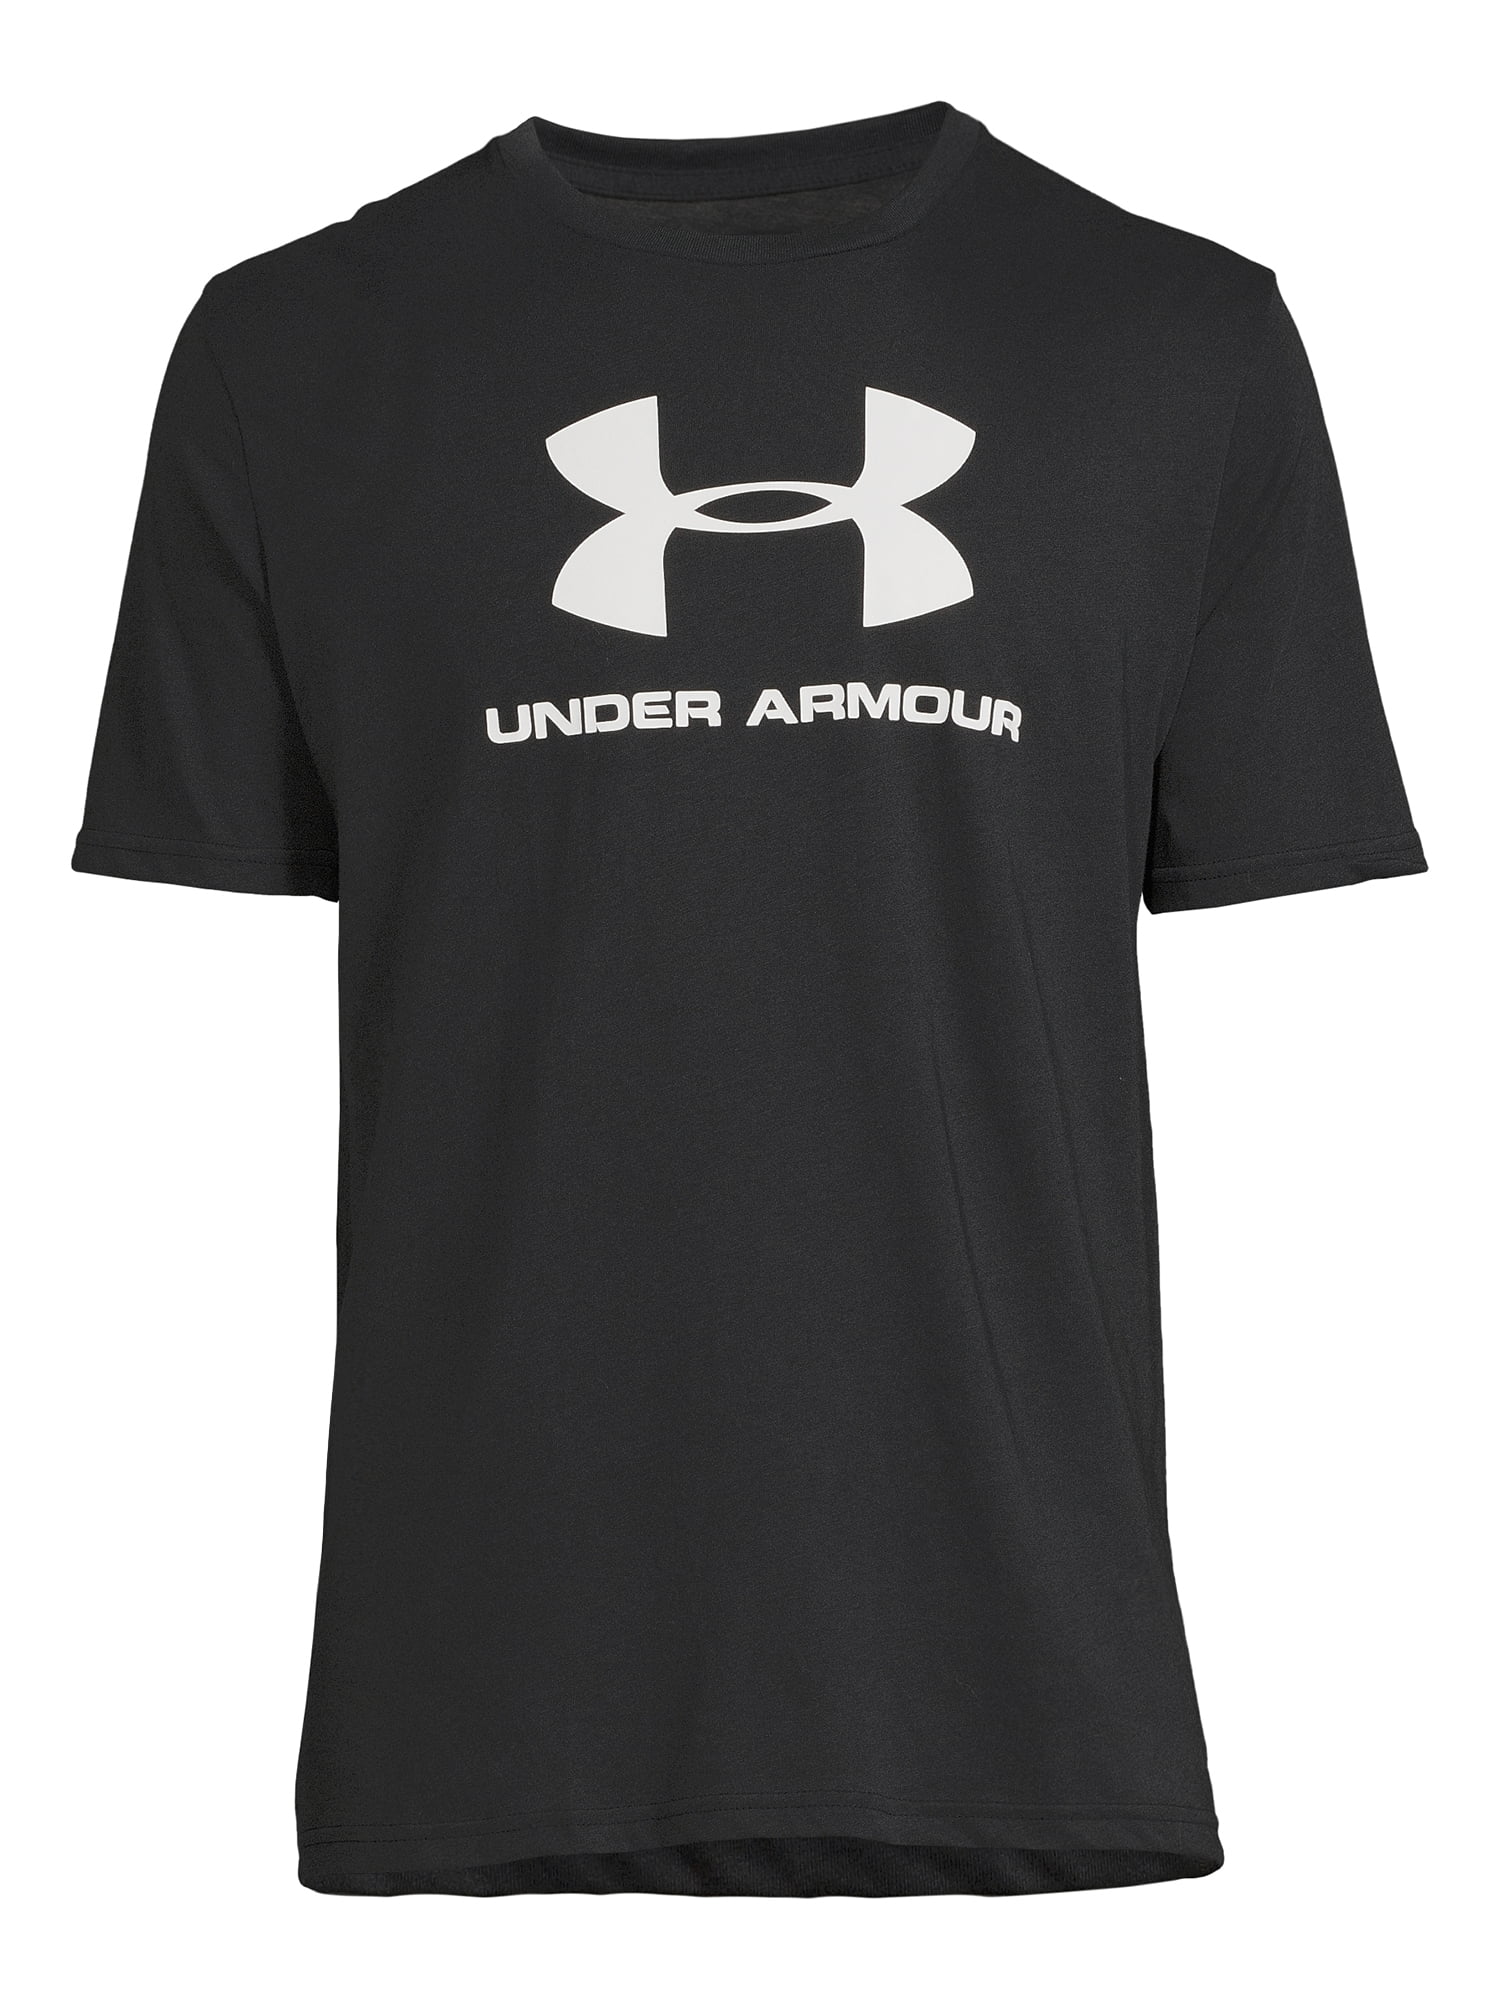 Under Armour Men\'s Sportstyle UA Logo Sizes up Big and Sleeves, 2XL T-Shirt Short with to Men\'s